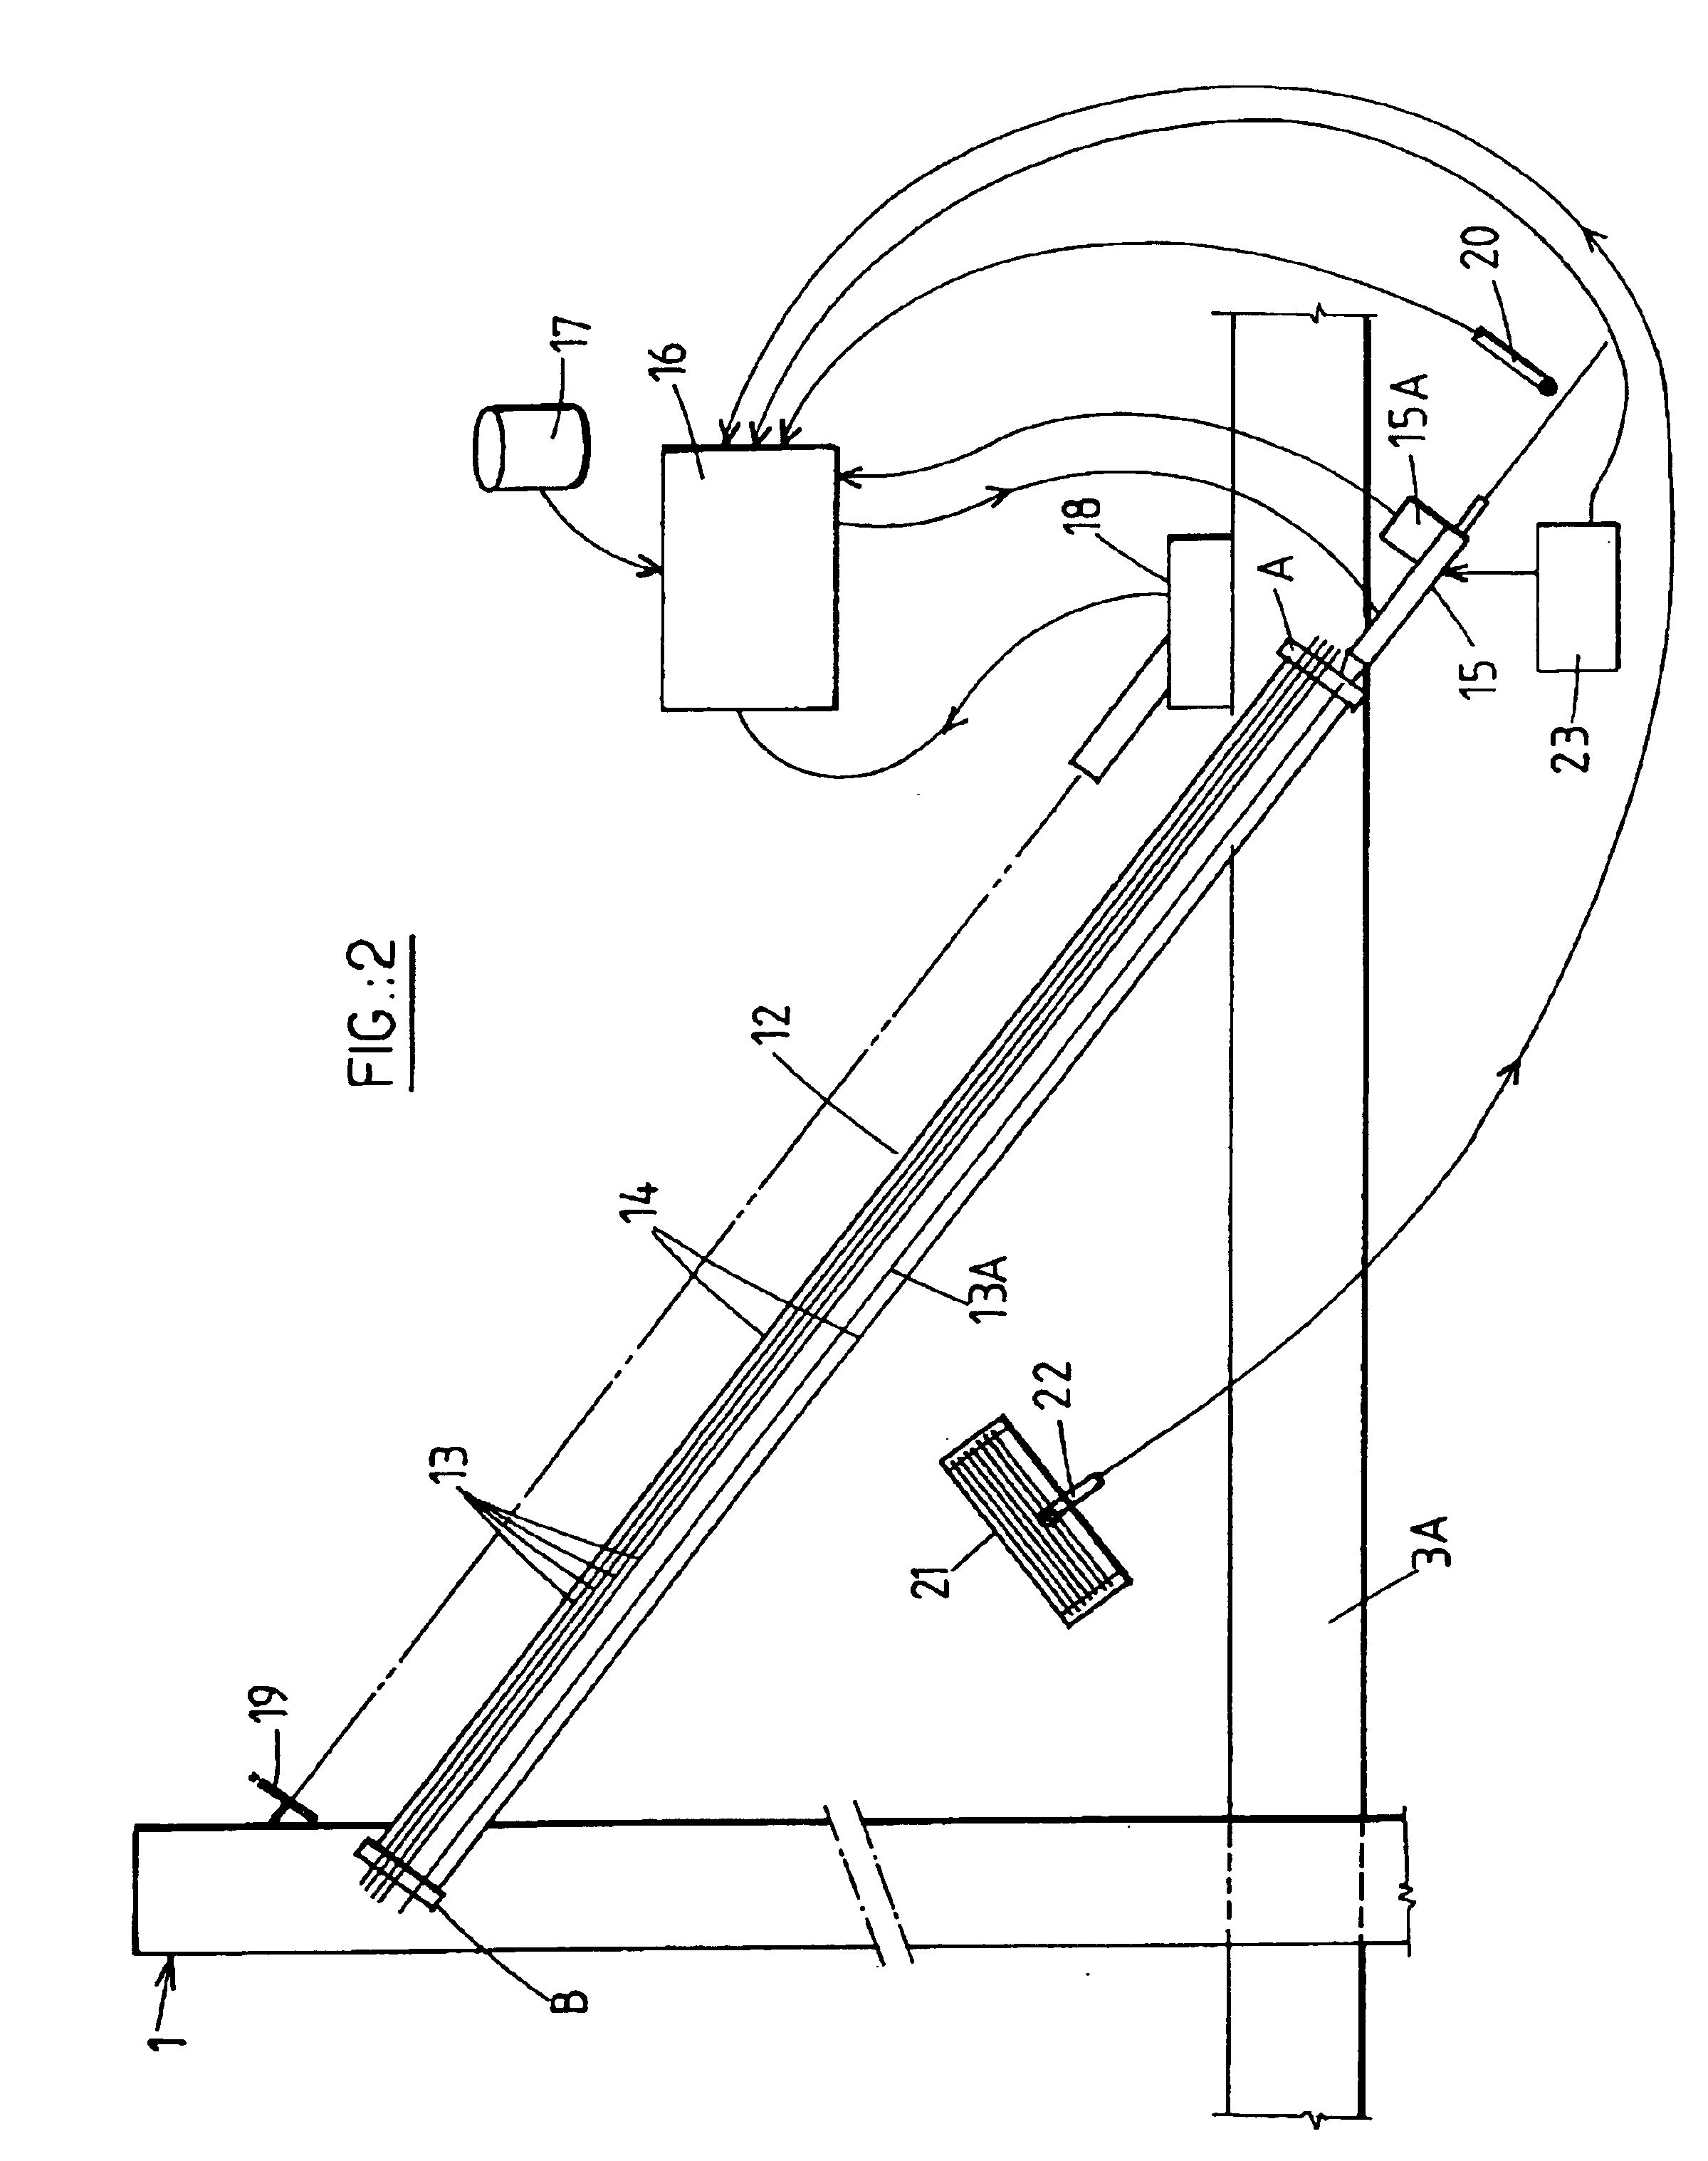 Method for tensioning multiple-strand cables